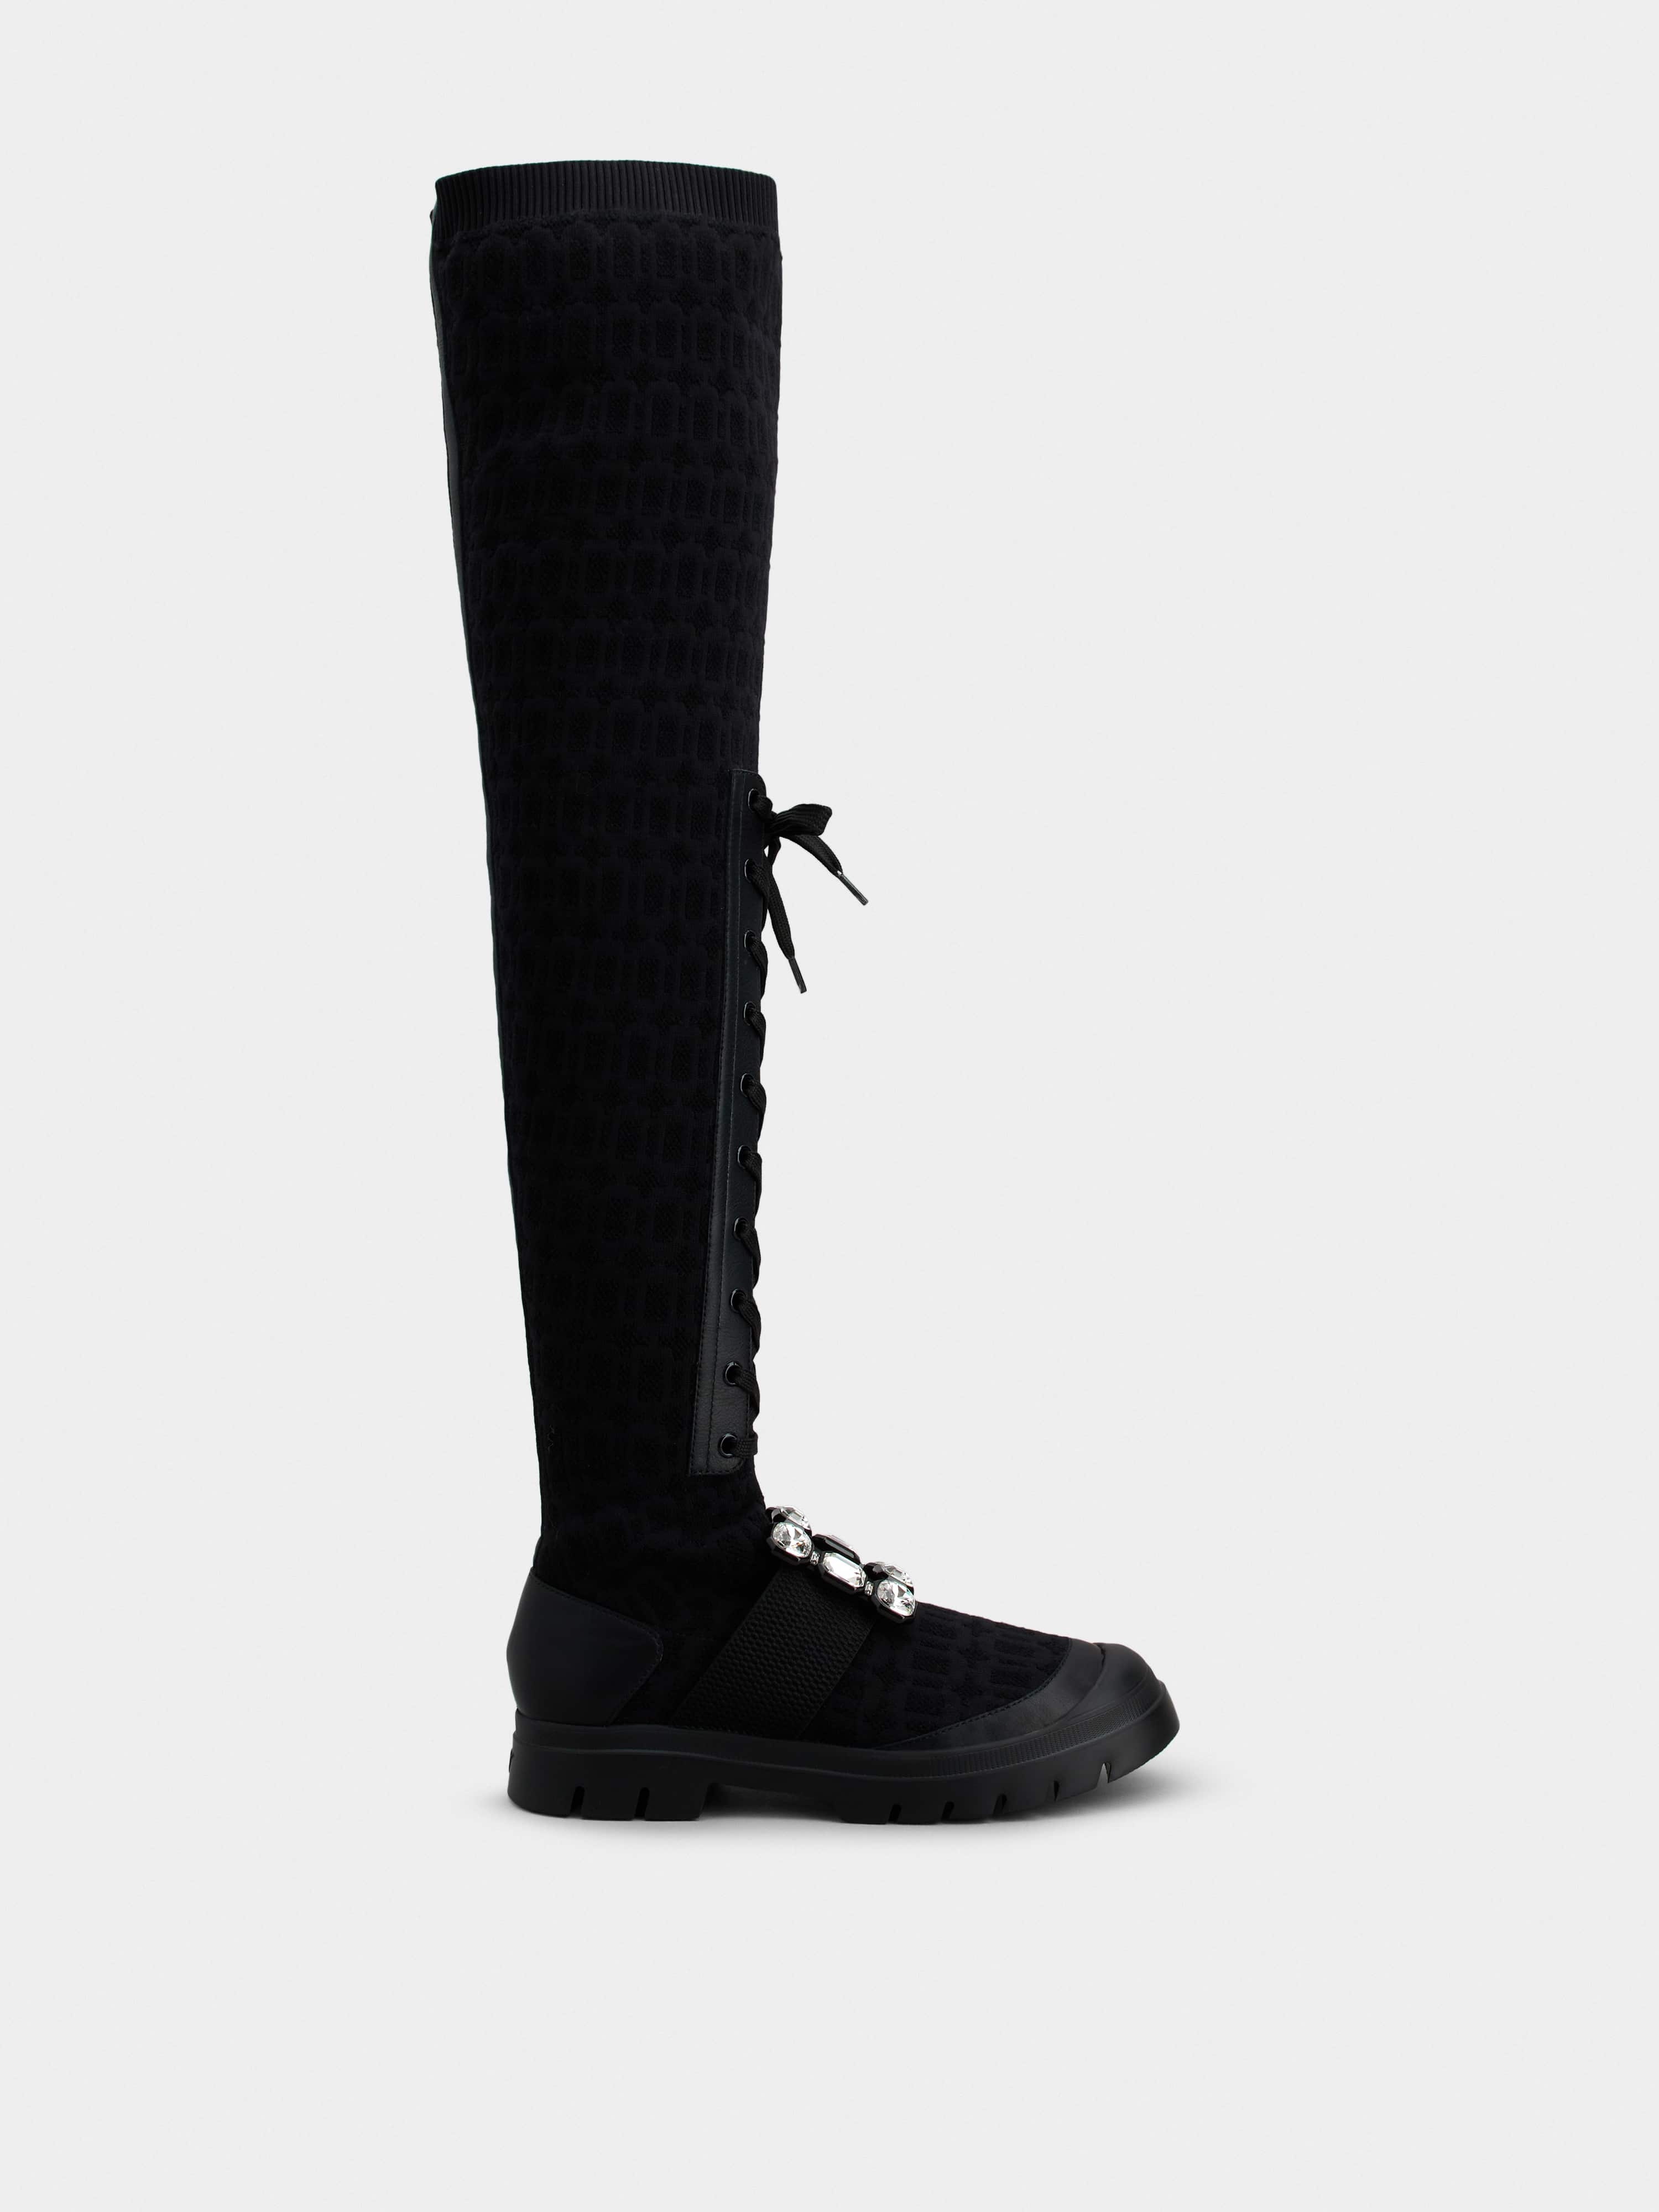 Walky Viv' Strass Buckle Socks Boots in Fabric and Leather - 1